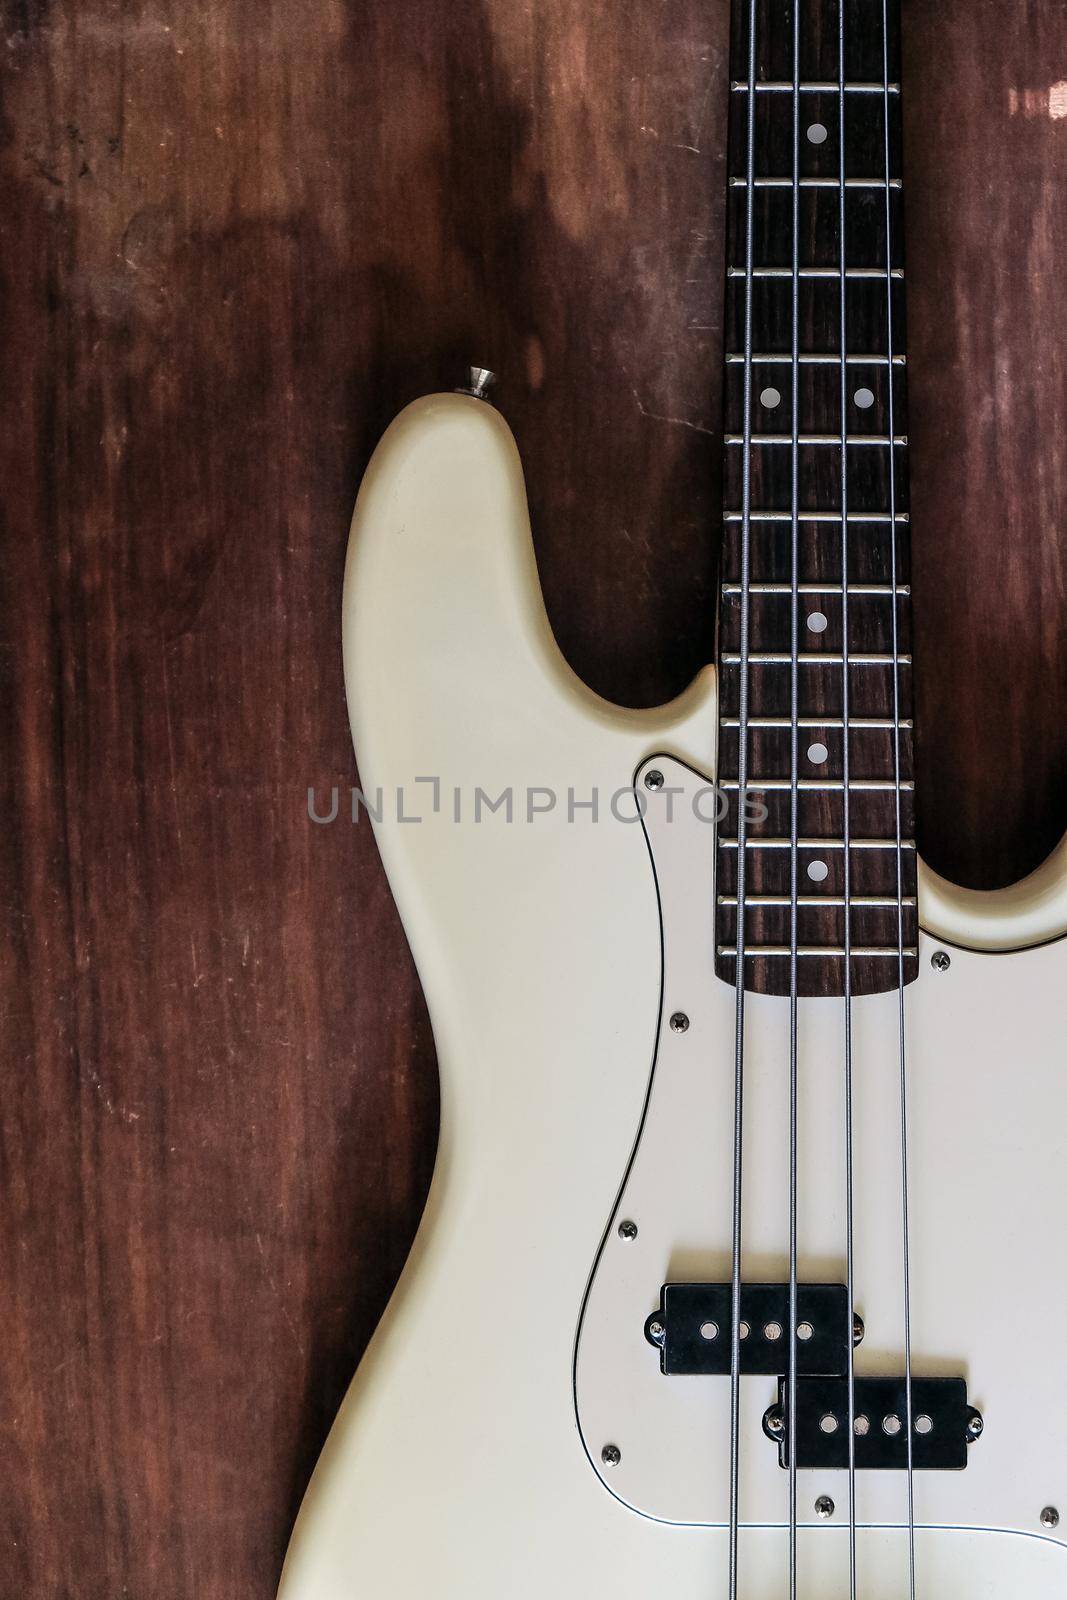 white electric bass guitar on wood background by ponsulak